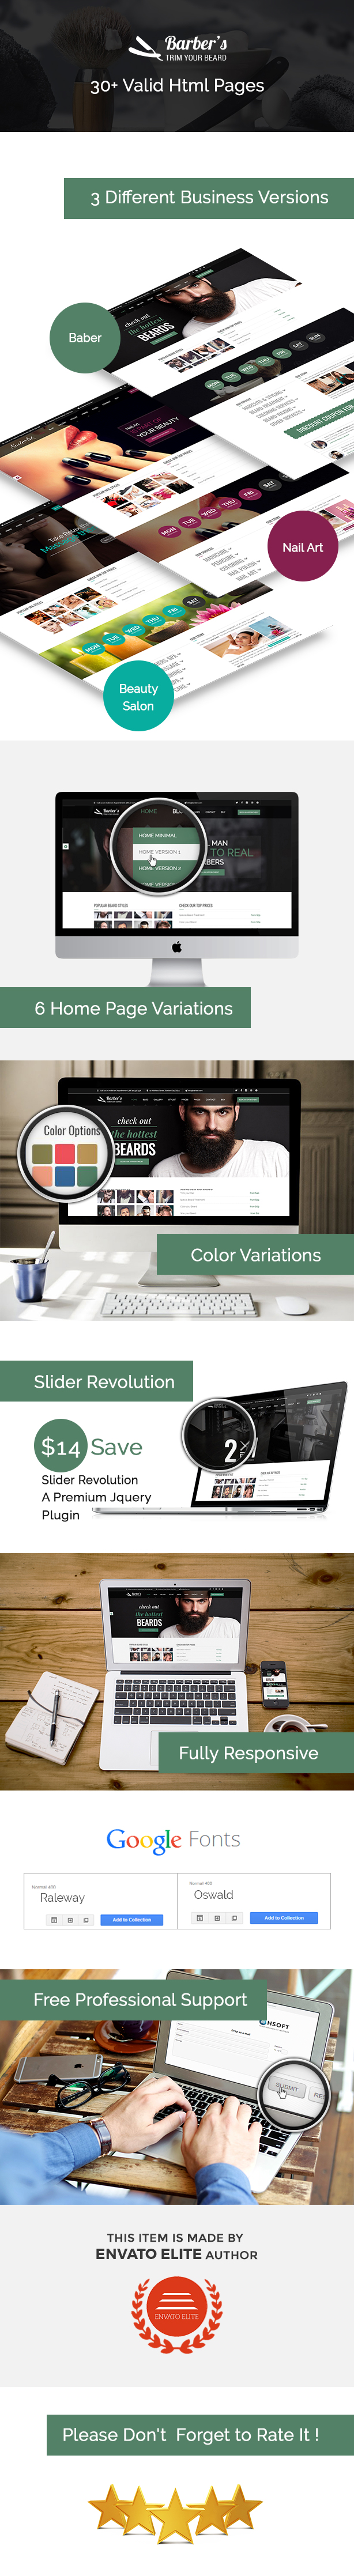 Barber - Html Template for Barbers and Hair Salon - 7